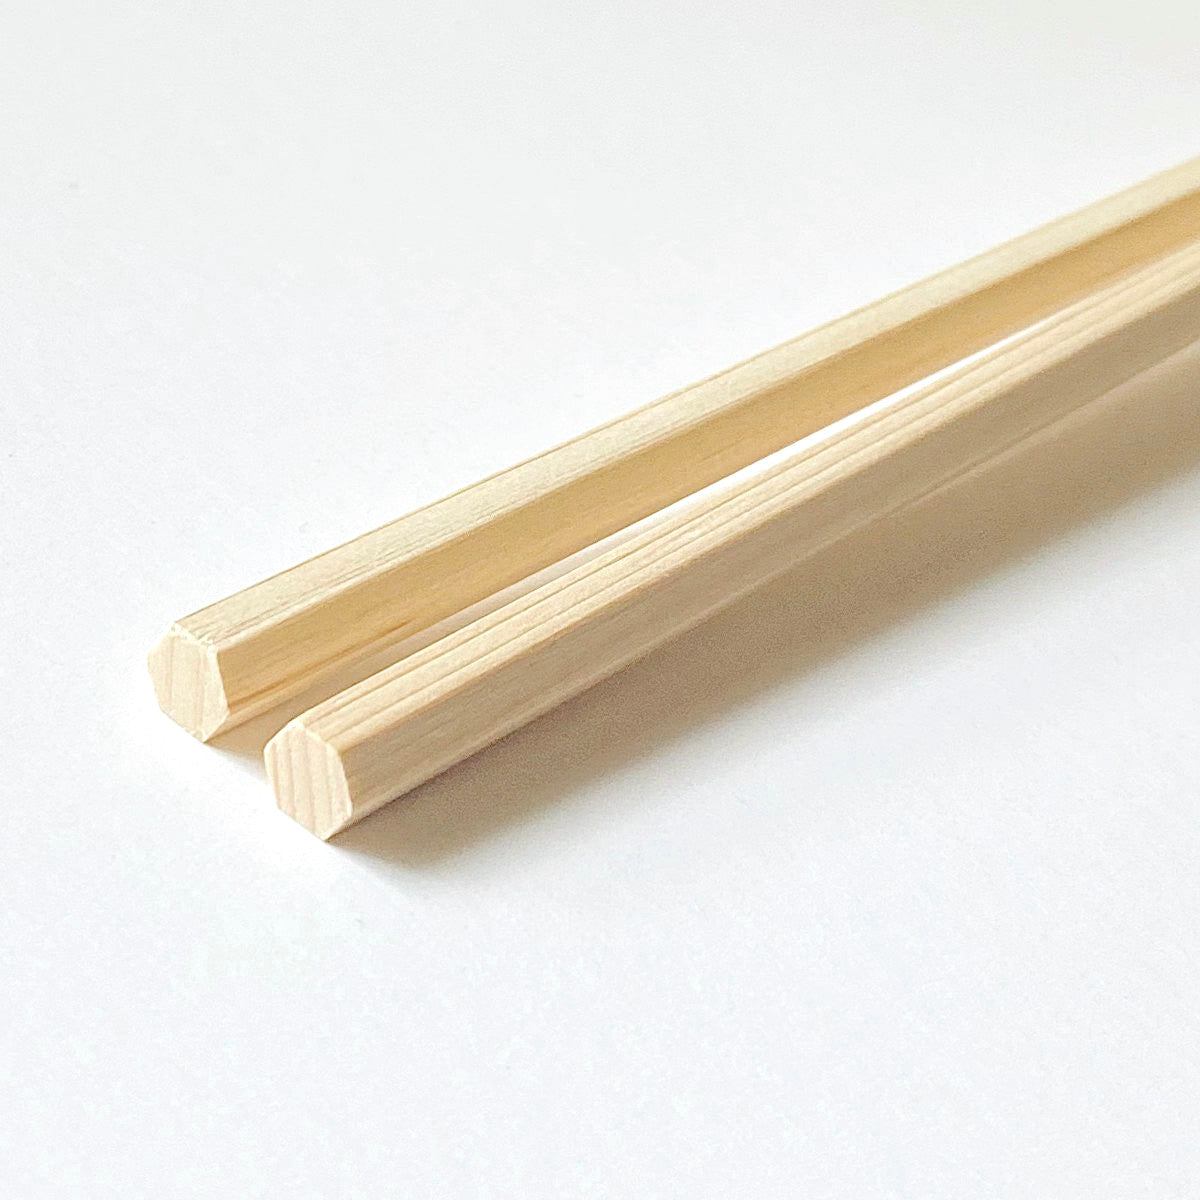 TE PLUS TEHinoki Chopstick is crafted from sustainable Hinoki Cypress wood and is shaped in a hexagonal for better grip. For multiple reuse. No oil or chemical applied. close-up image